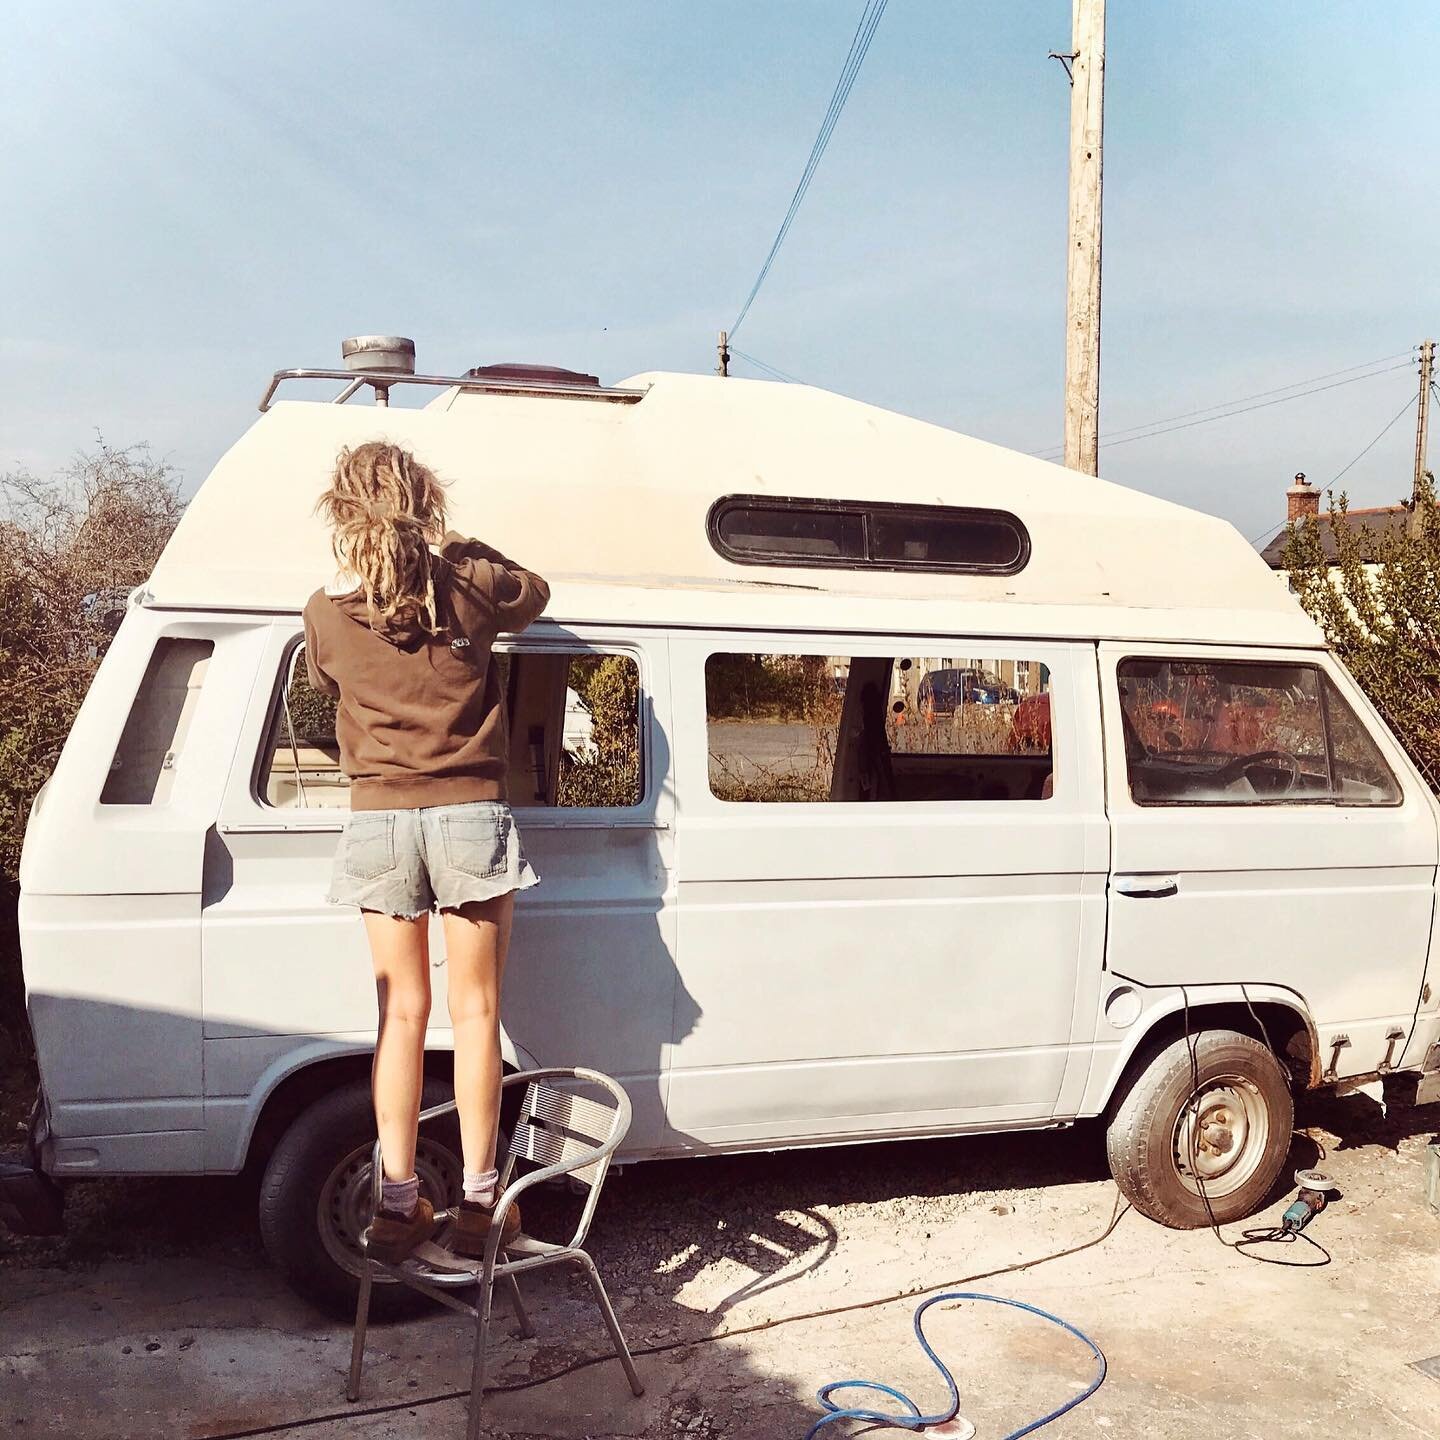 Roxy- VW T25 (another baby of mine). 😉 What a transformation! 
This was a big oleee job, that we started during lockdown a few years back. Most of the materials we salvaged to keep costs down and tried to do as much ourselves as possible. I&rsquo;m 